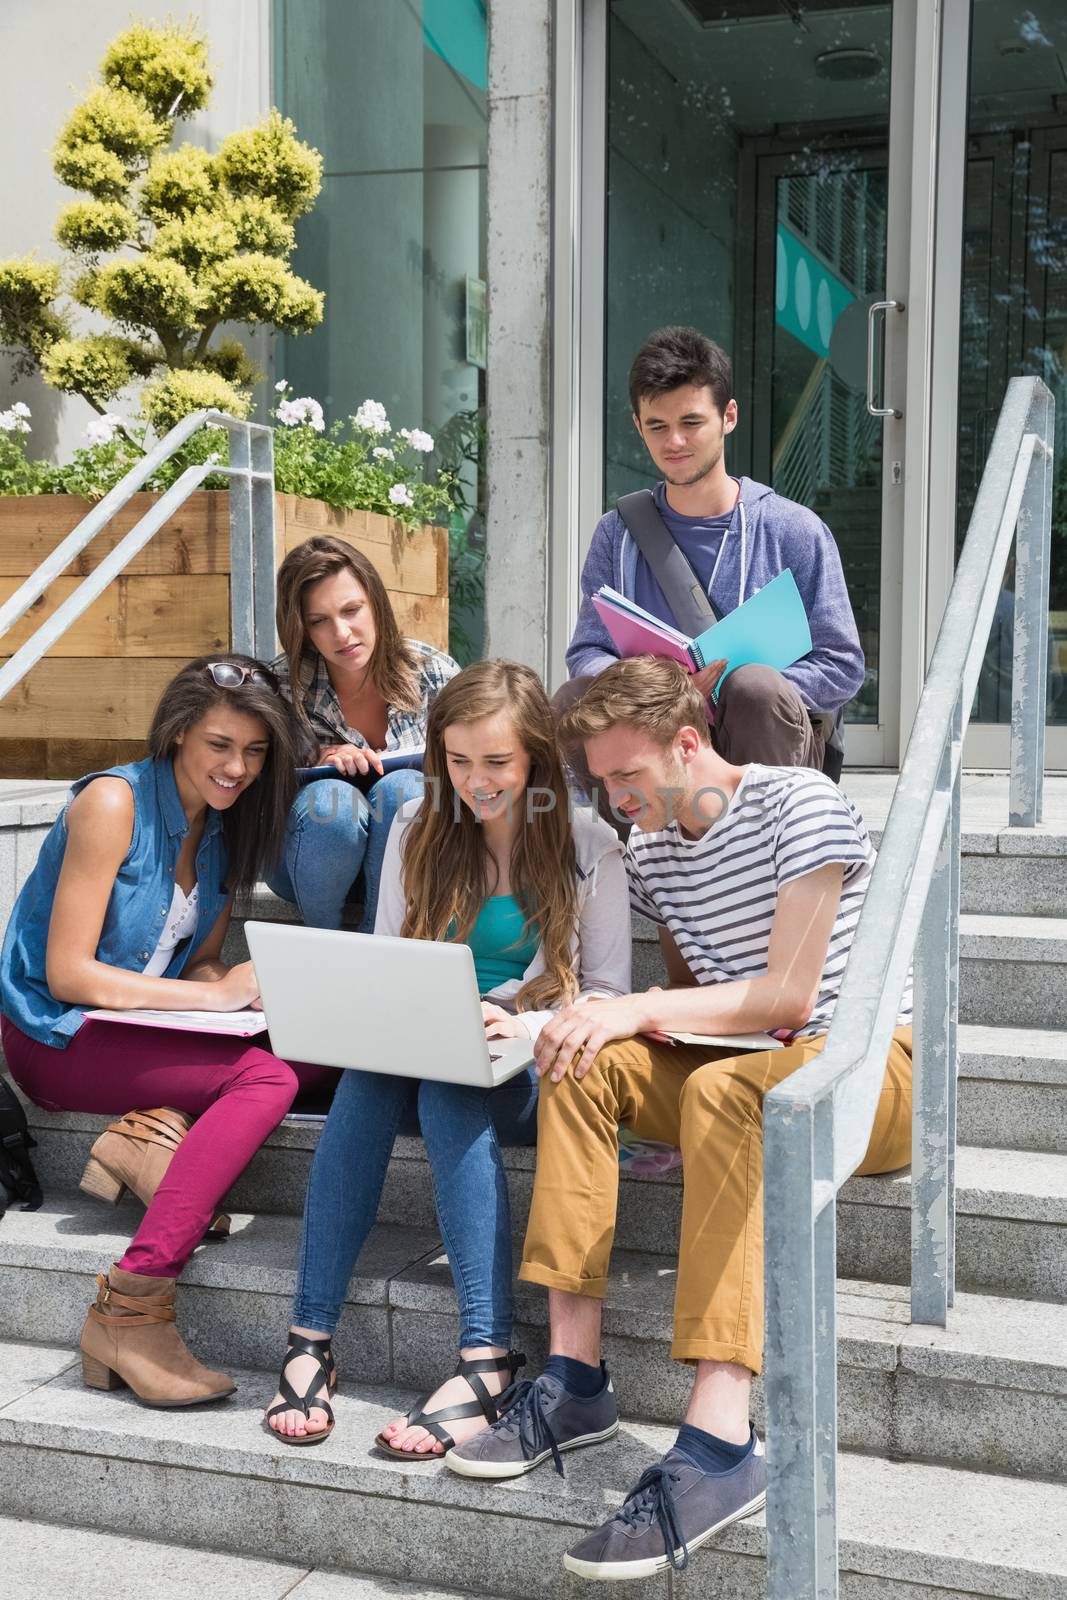 Students sitting on steps studying at the university